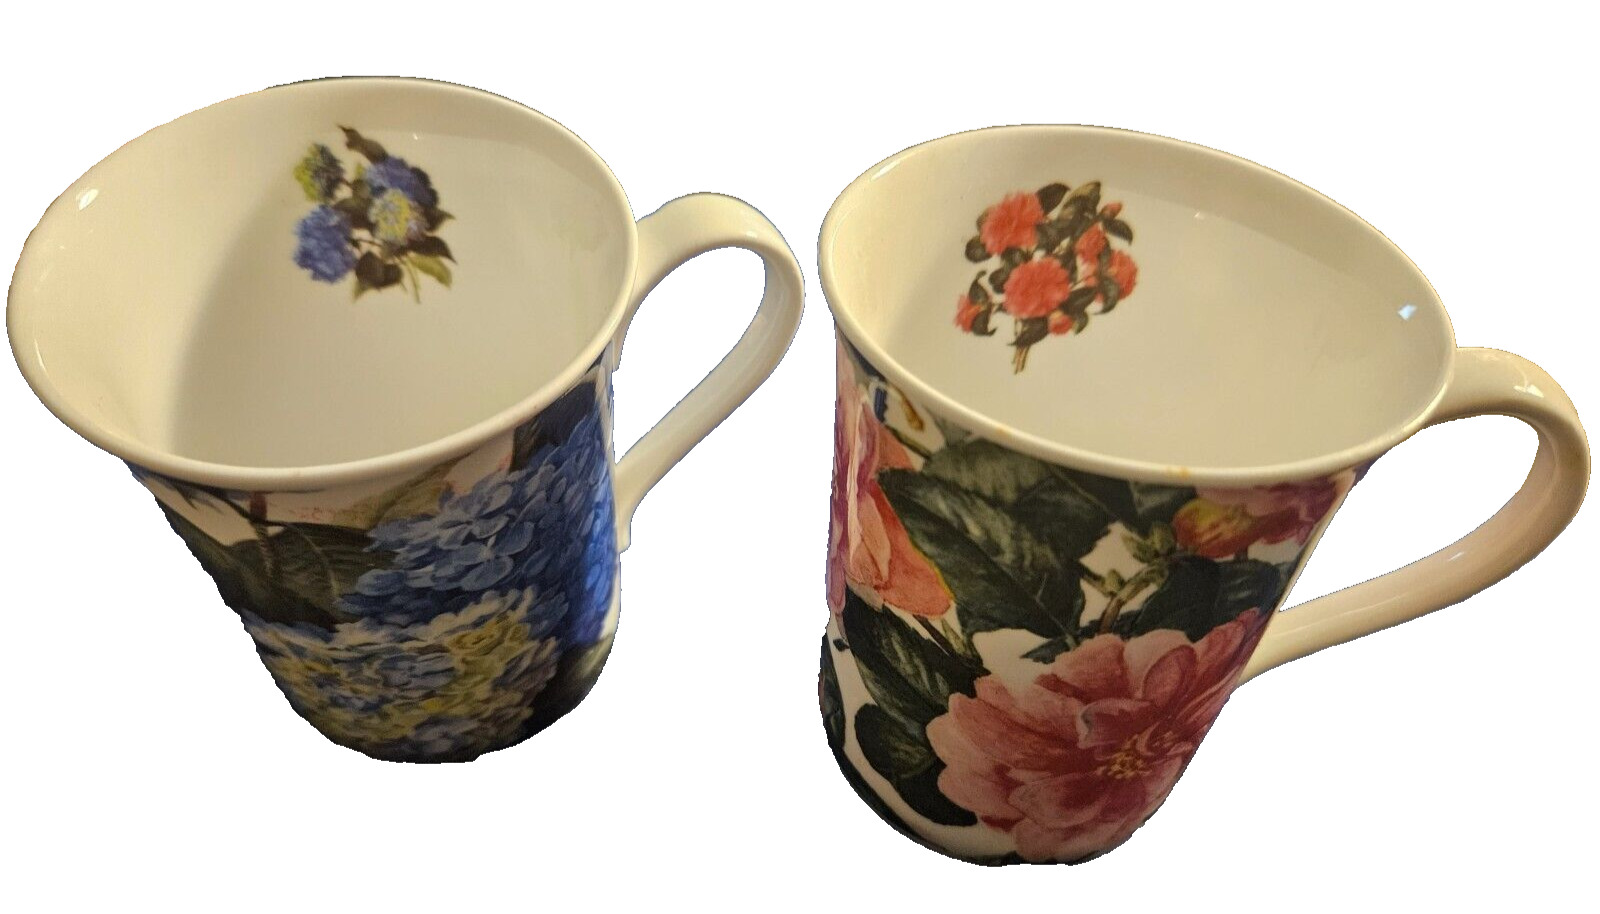 UPDATE: Floral CUPS AND Decorative Plates of Works At THE NATIONAL TRUST